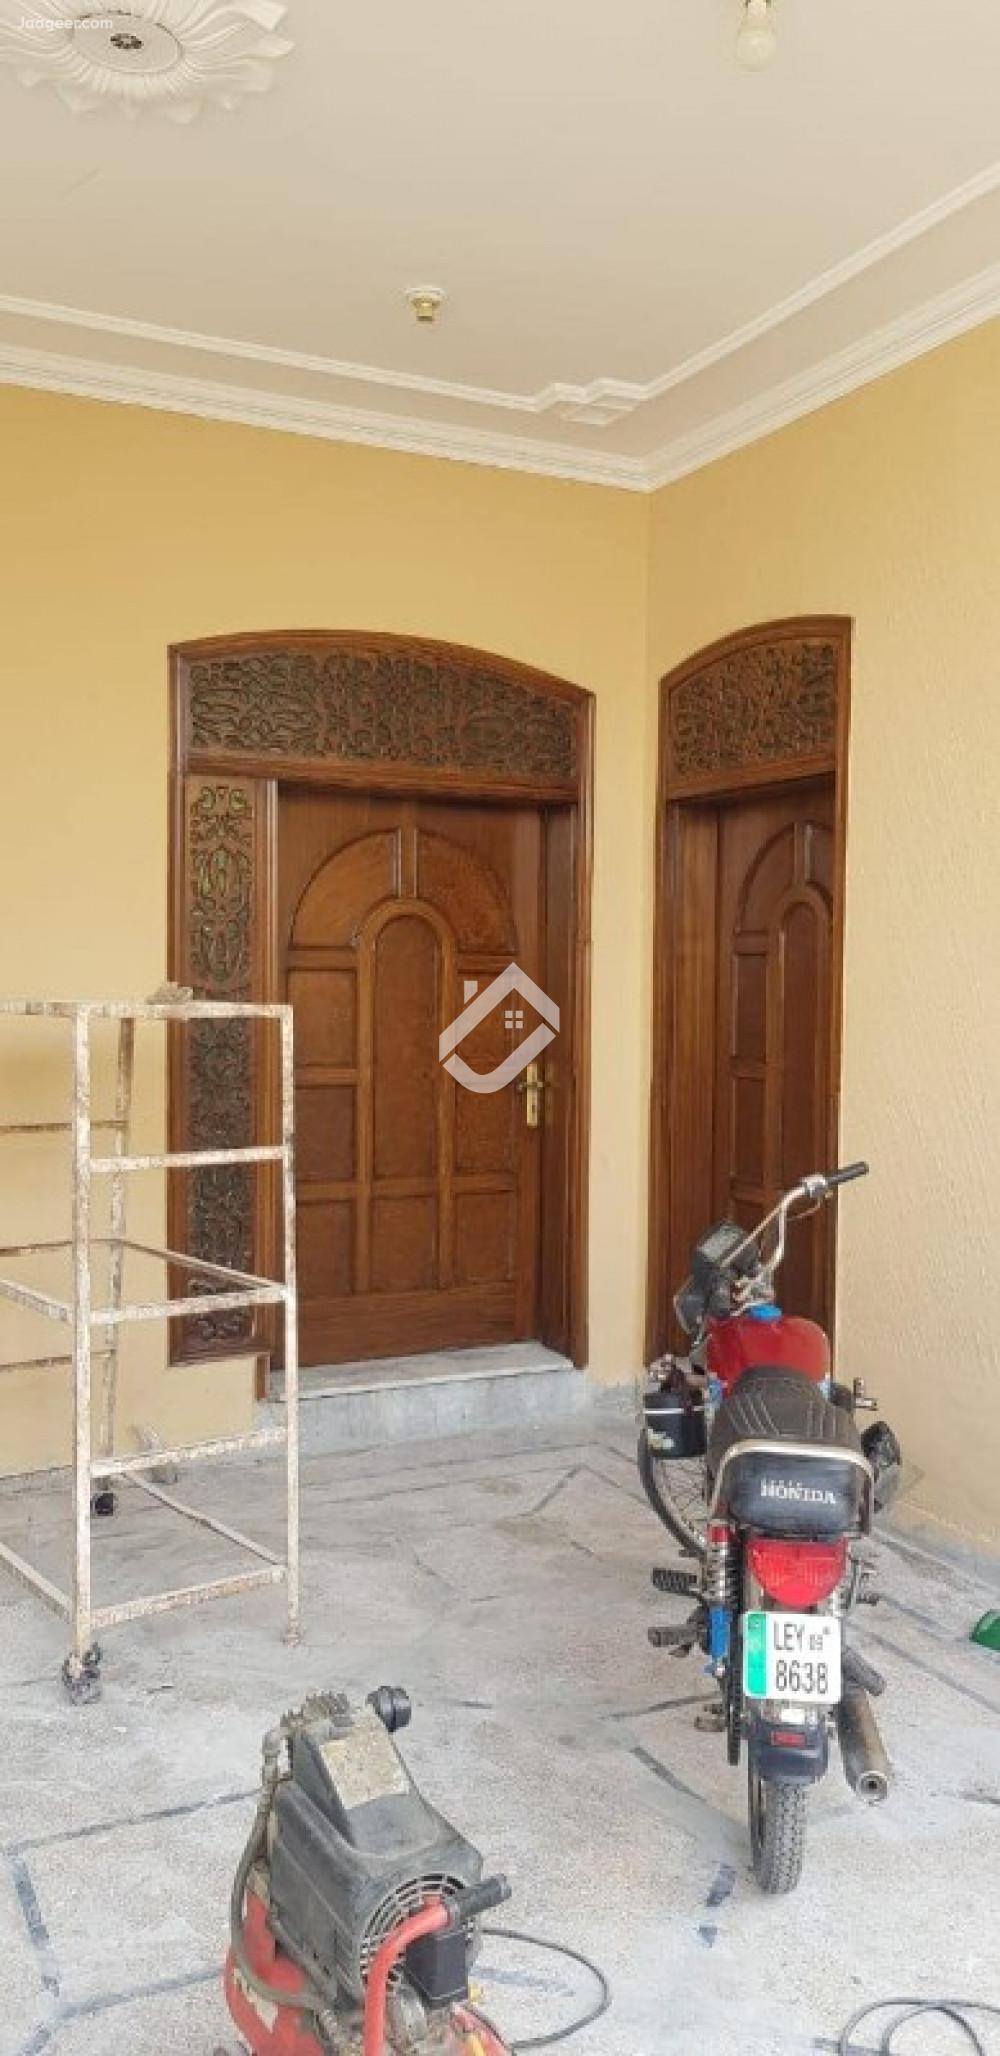 Main image 10 Marla Double Storey House For Sale In Wapda Town Cooperative Housing Society Wapda Town, Lahore